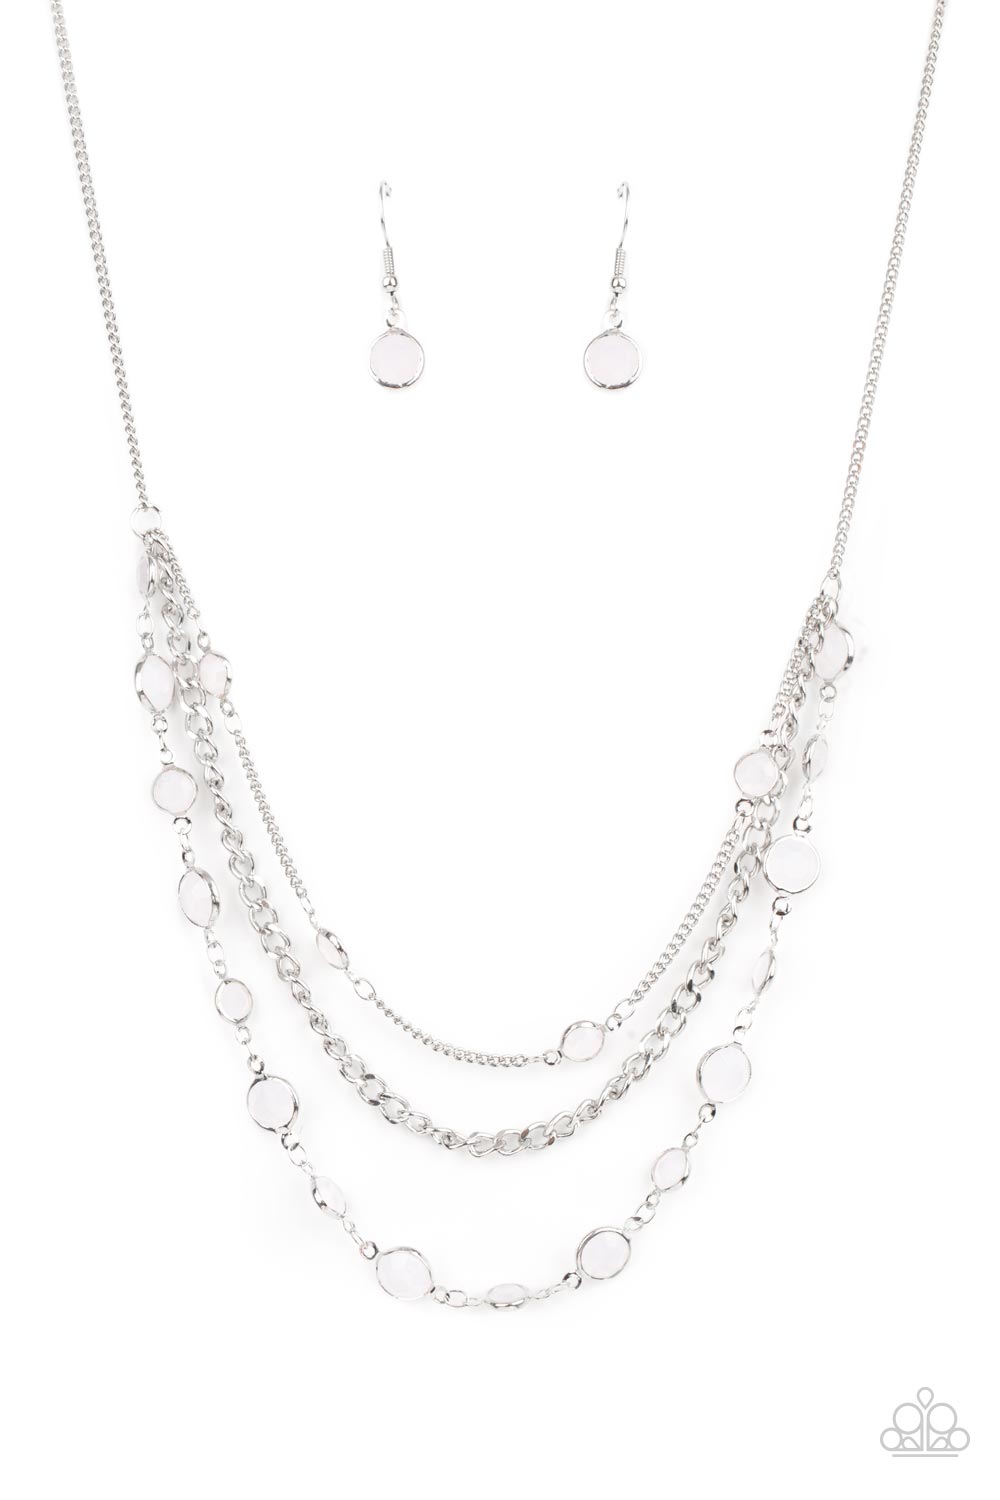 Goddess Getaway - Paparazzi - White Beaded Silver Layered Necklace